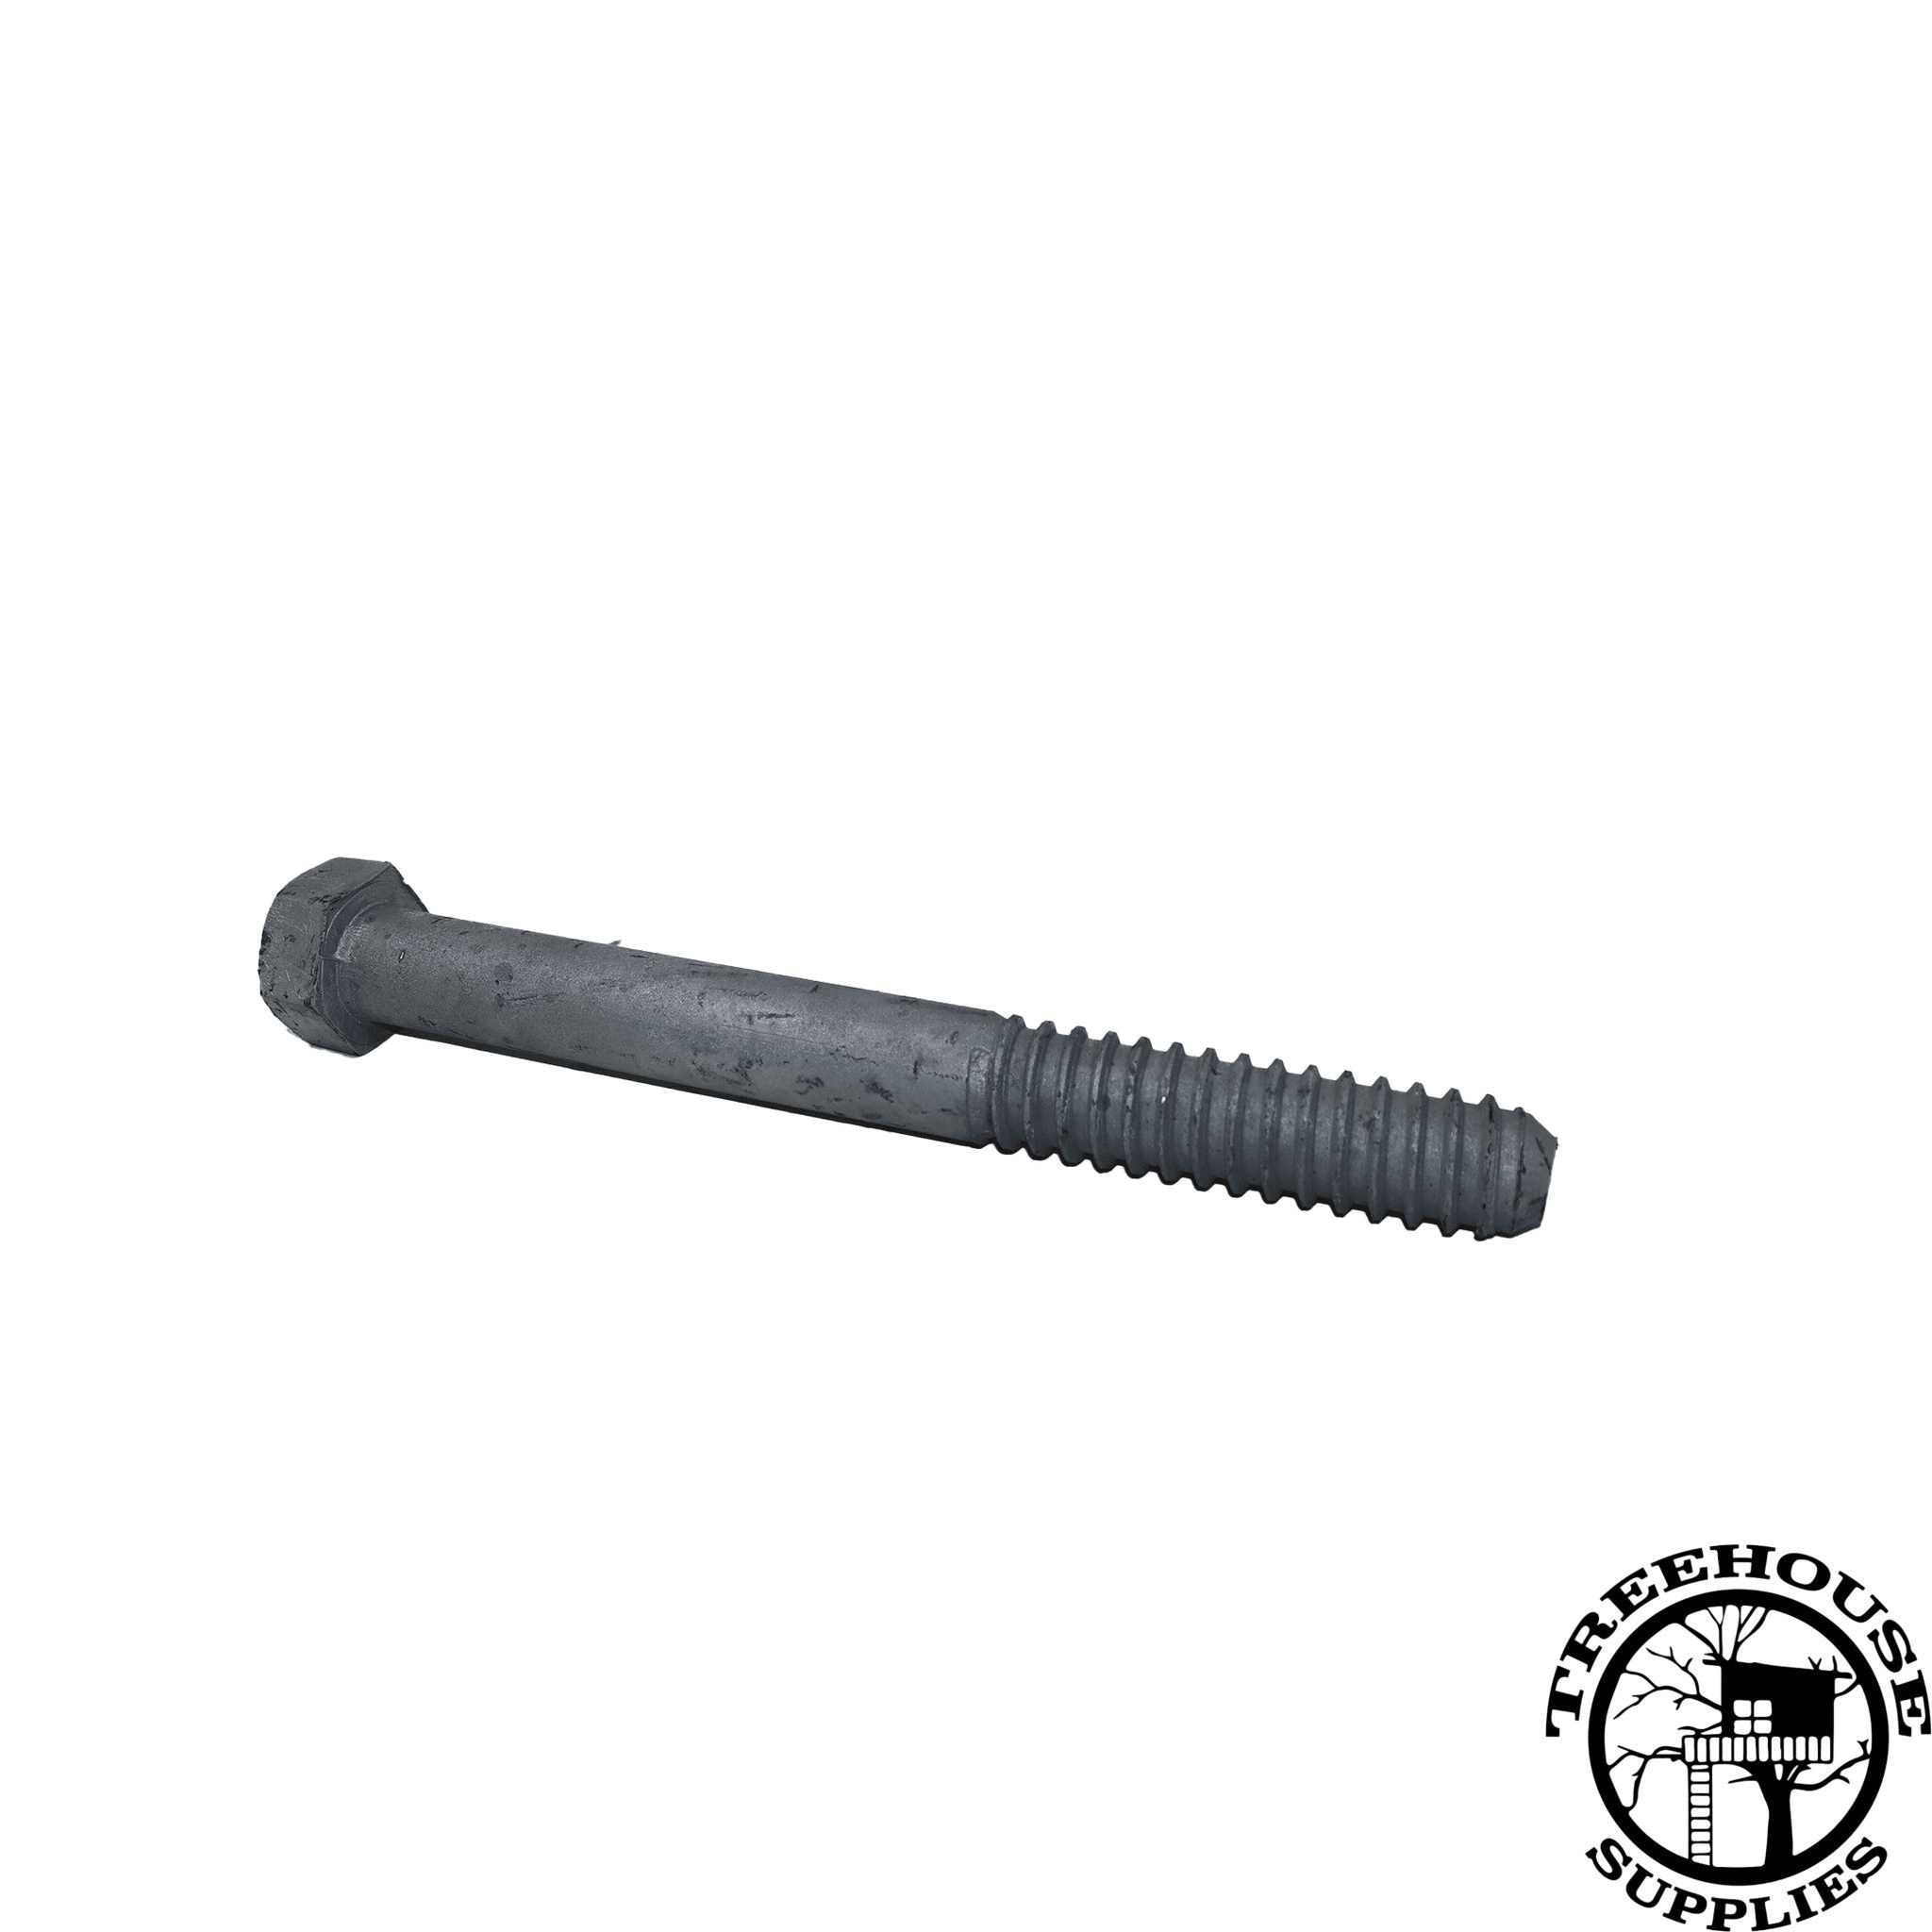 Overhead view of a 1-1/4" X 12" Lag Bolt. White Background.